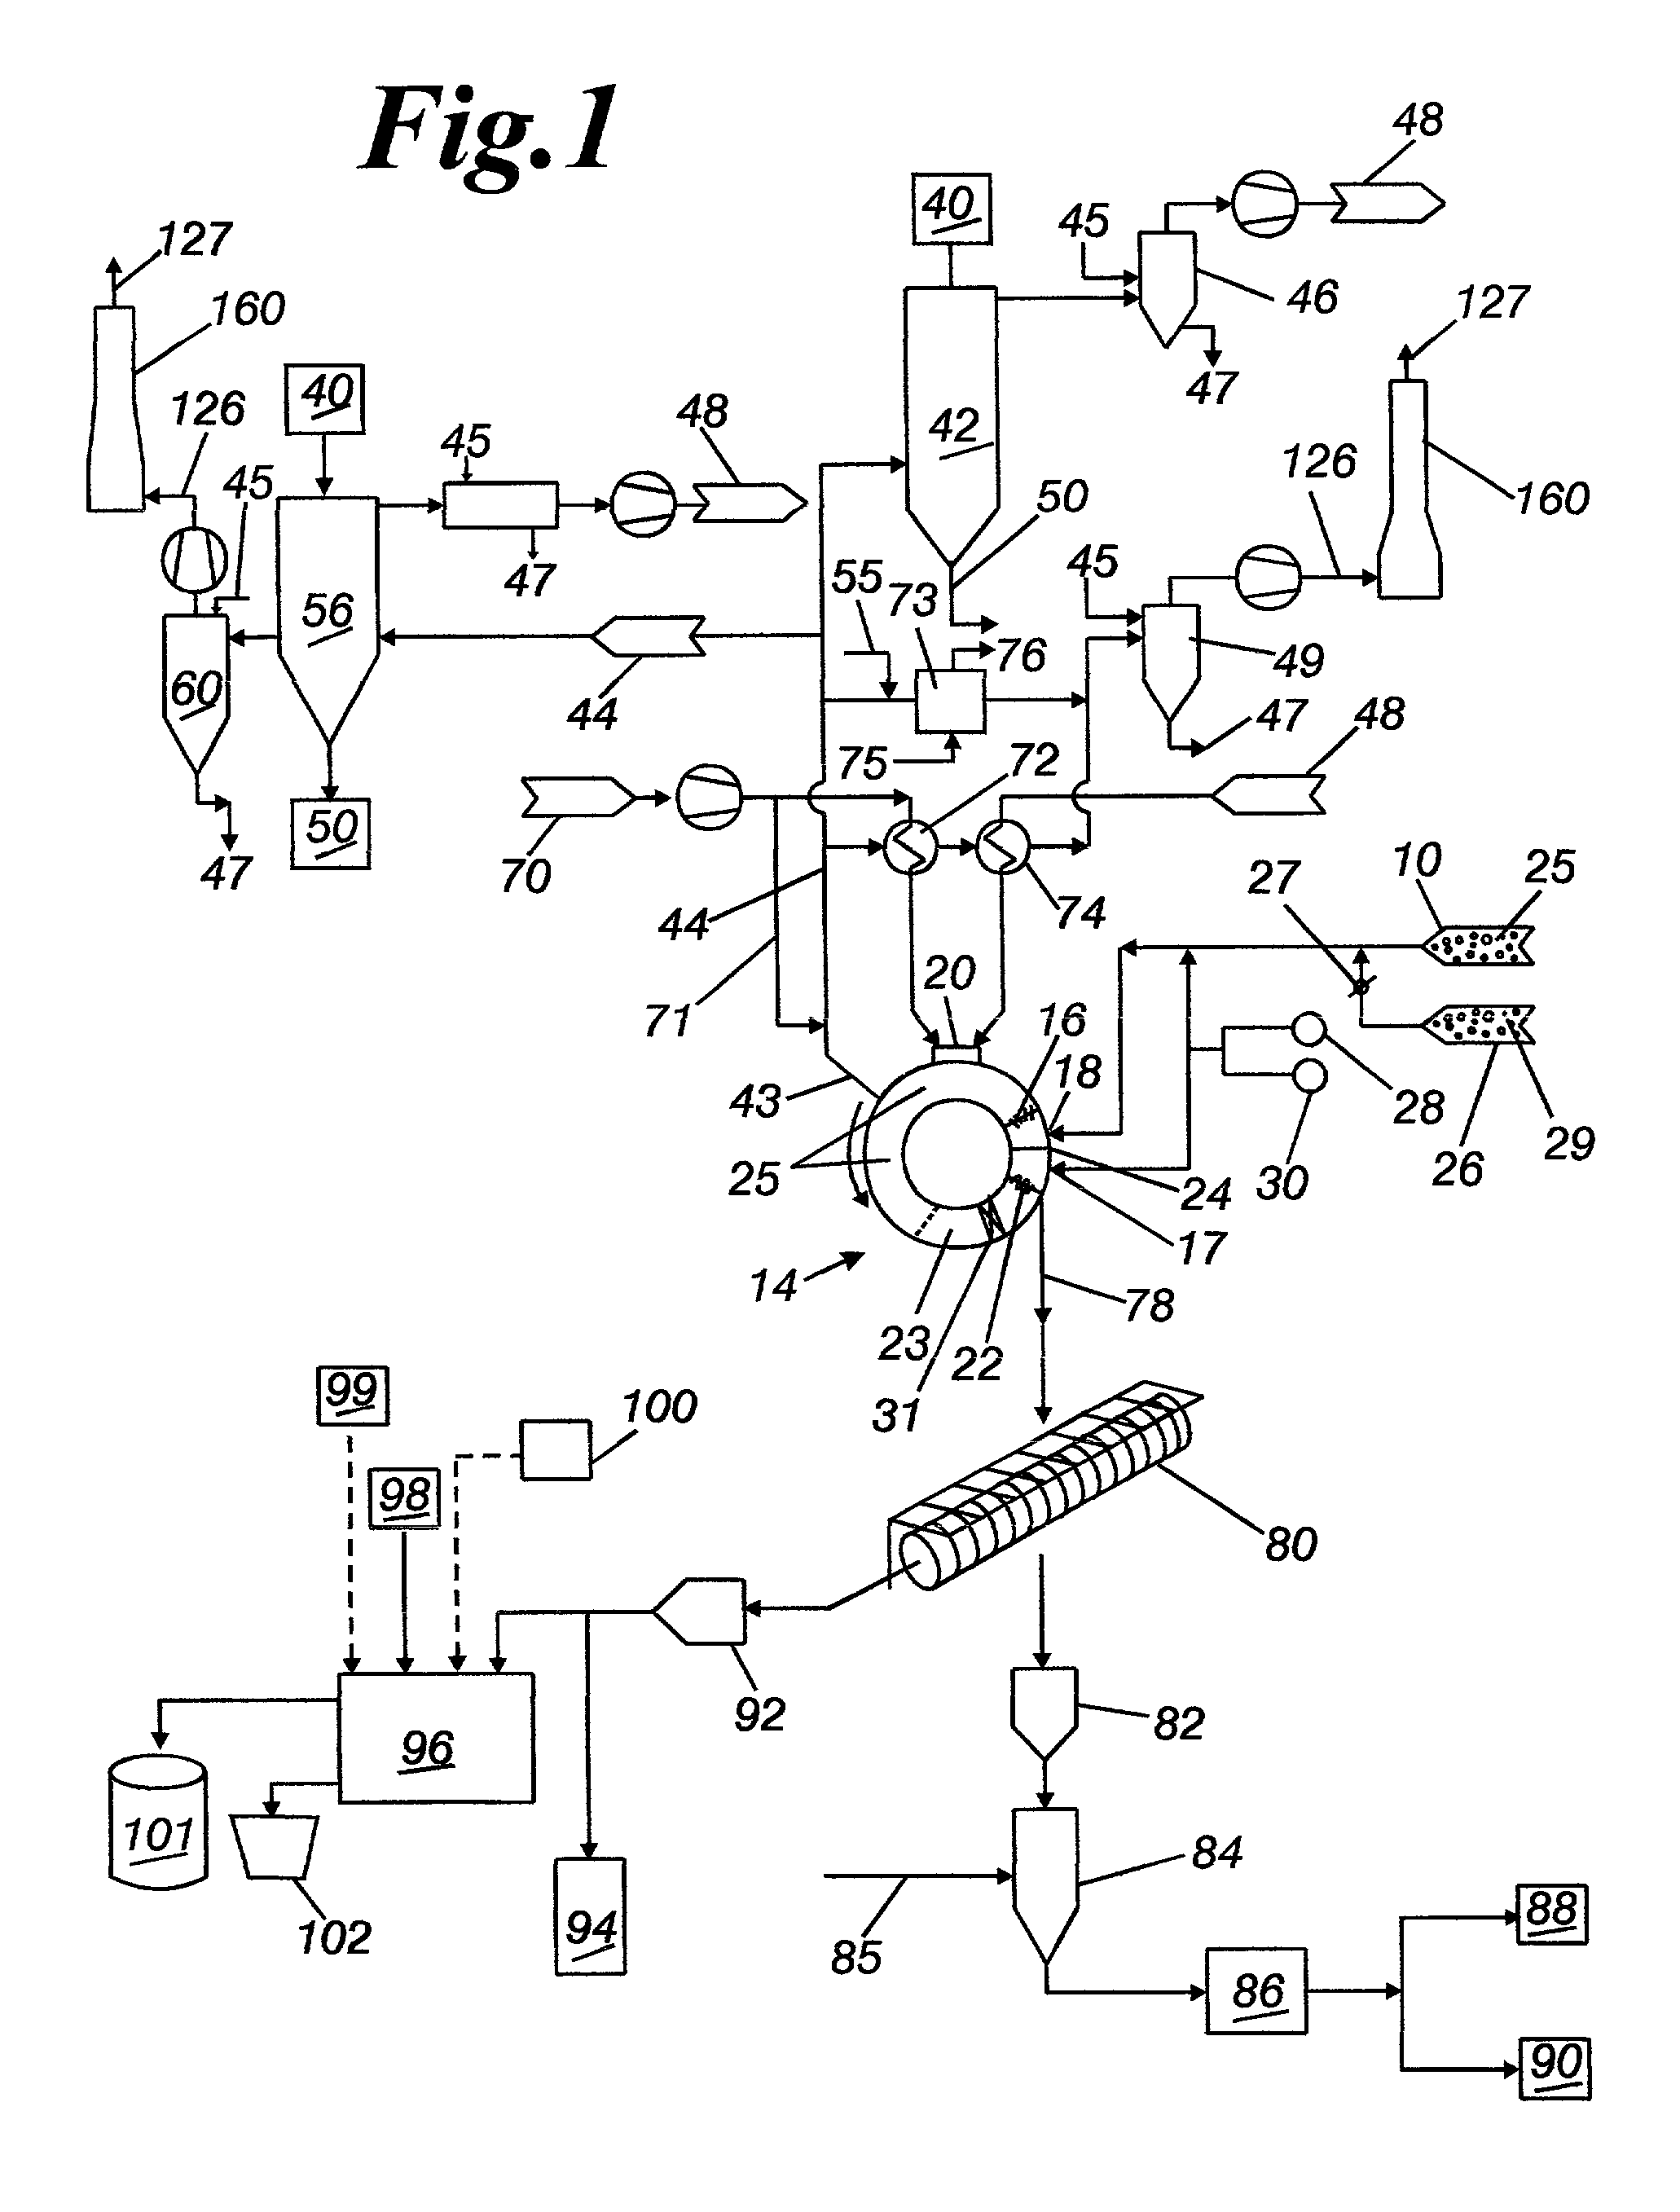 Method of direct iron-making / steel-making via gas or coal-based direct reduction